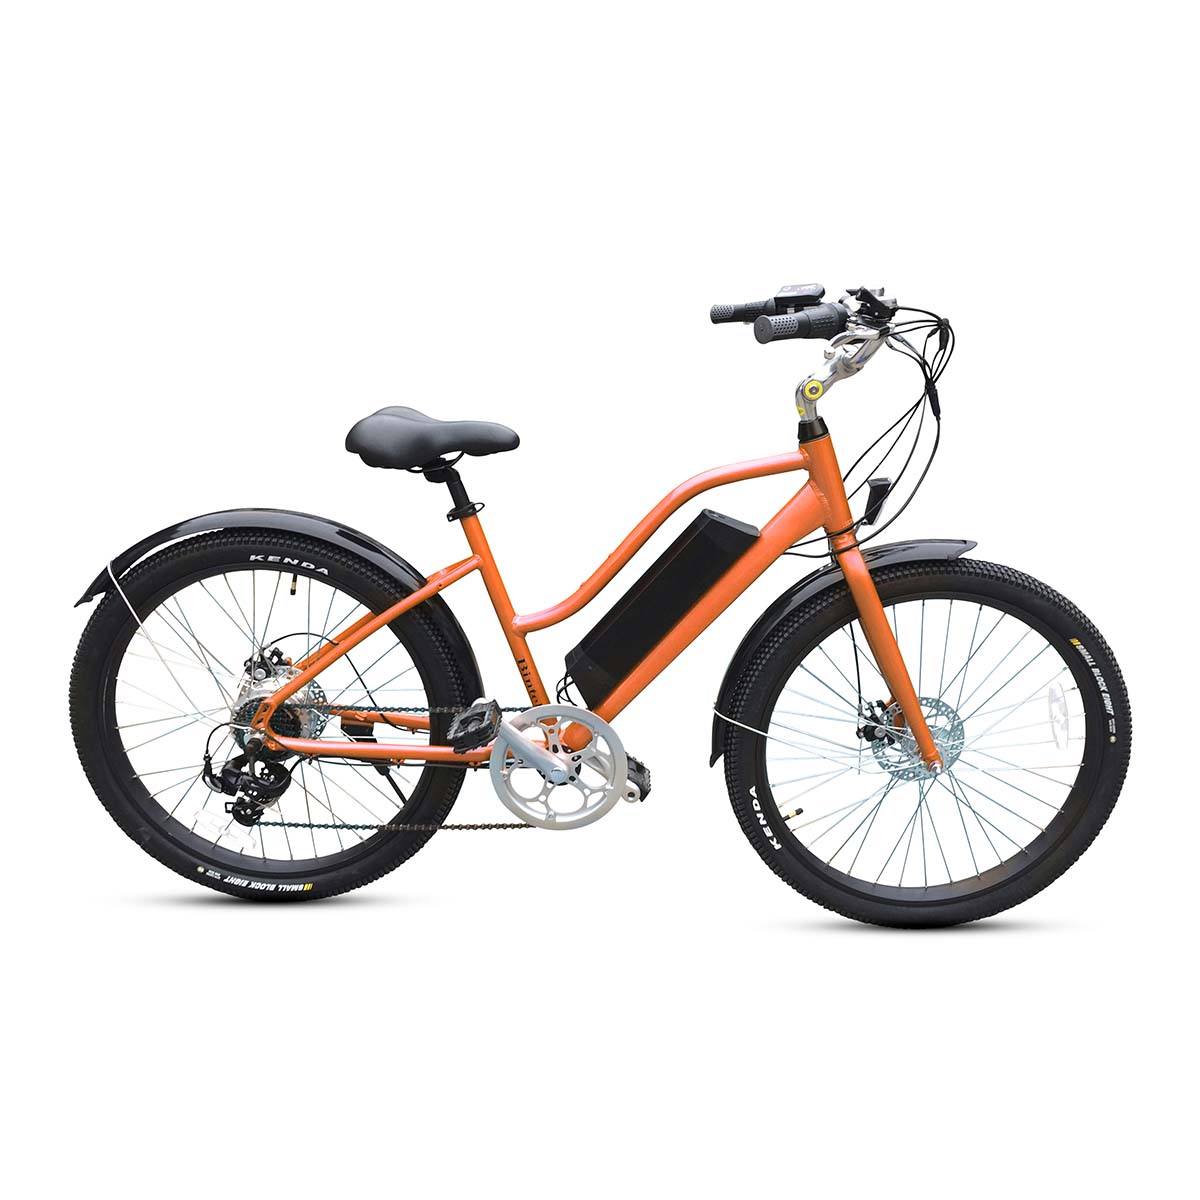 The white colour bintelli B1 electric bicycle with 350w and 20mph speed